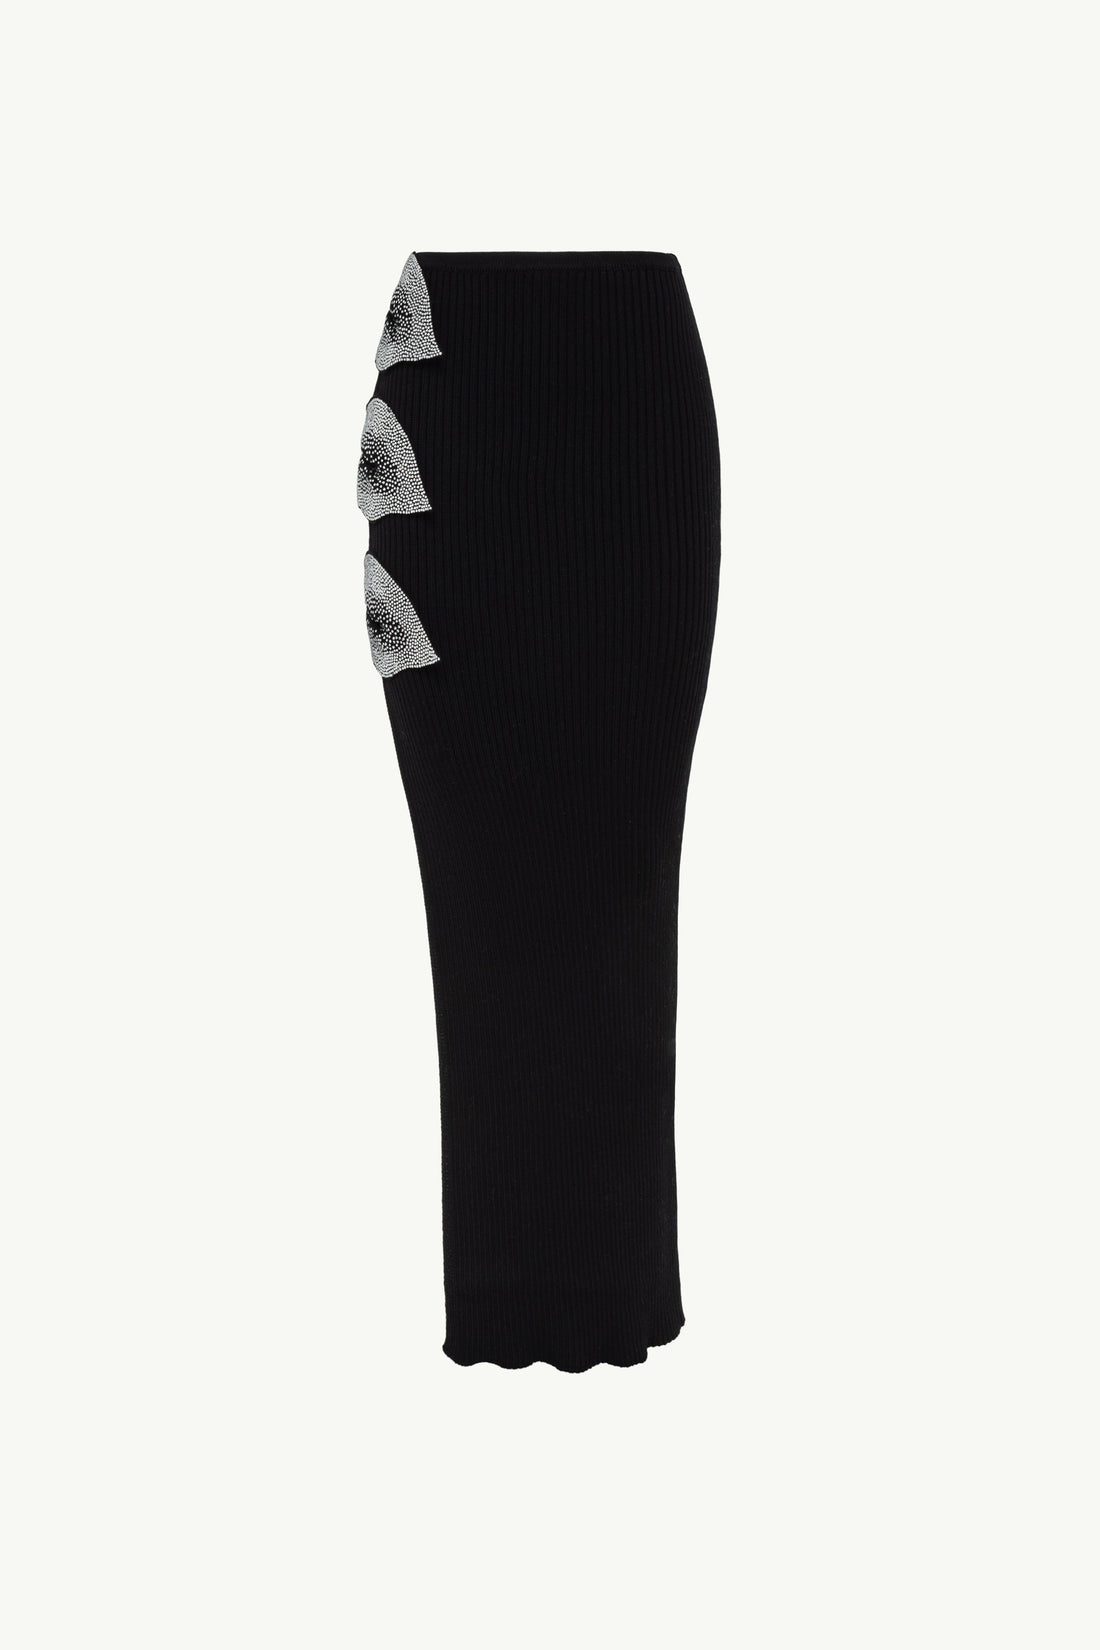 GIUSEPPE DI MORABITO Cotton Knit Long Skirt with Floral Details